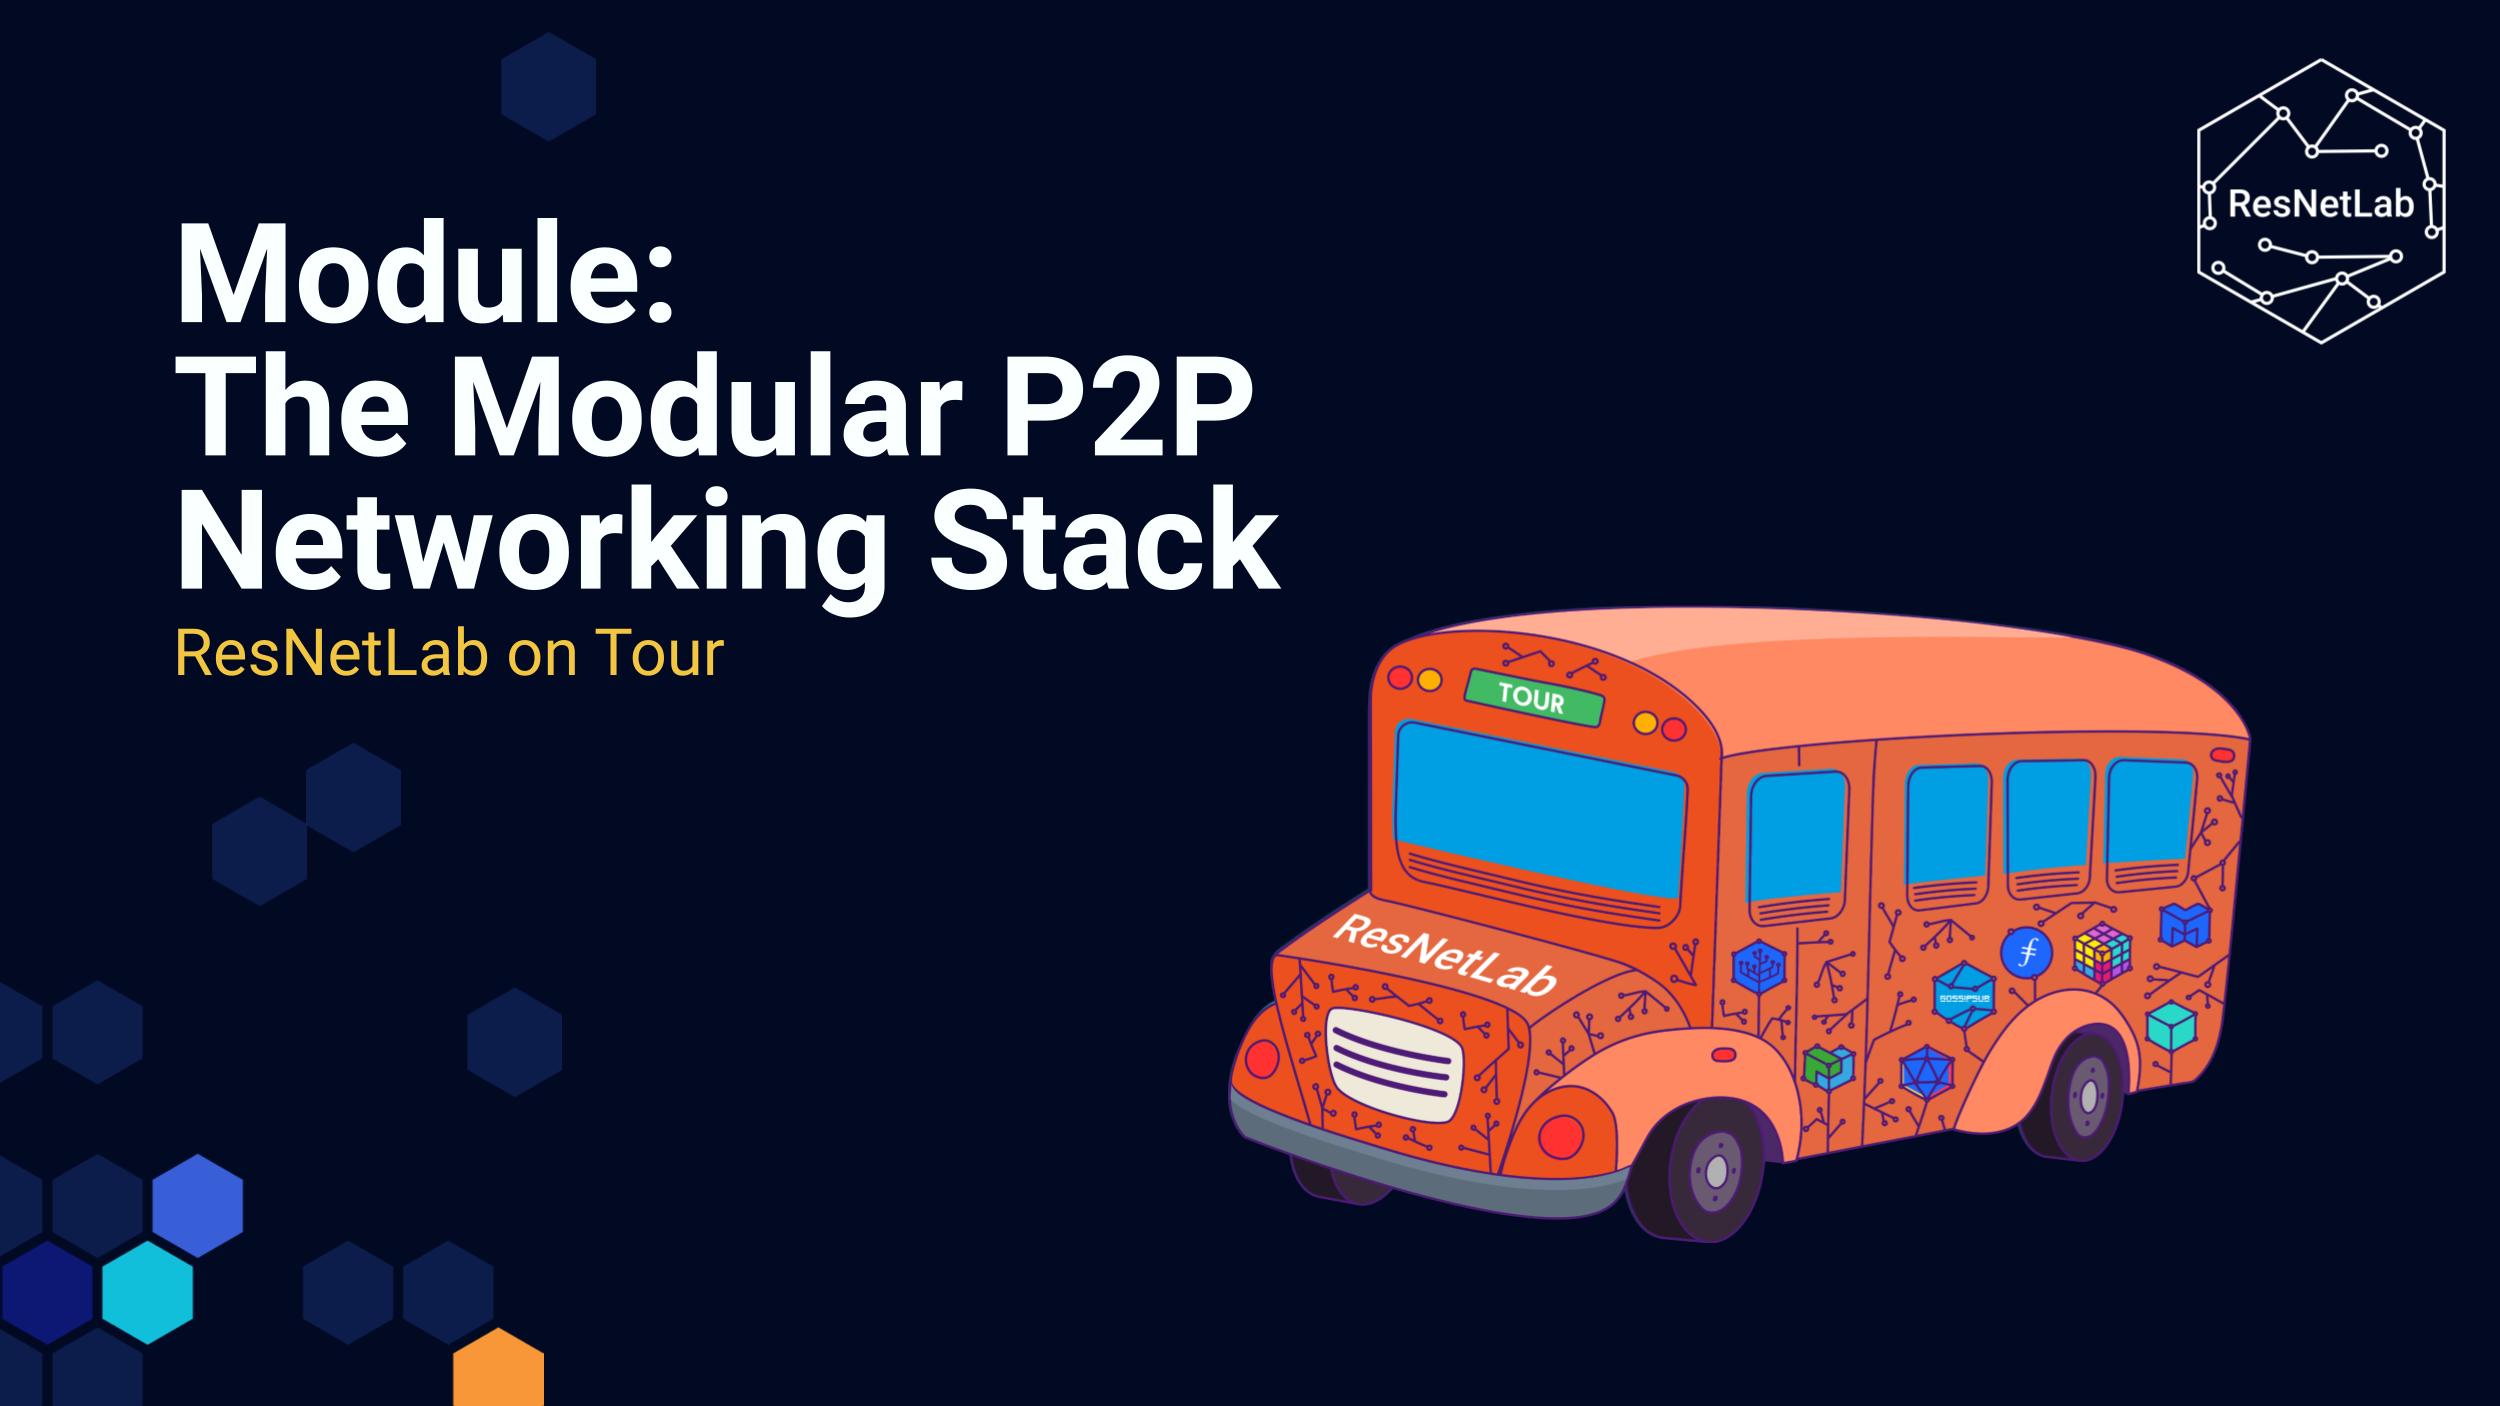 The modular P2P networking stack video thumbnail